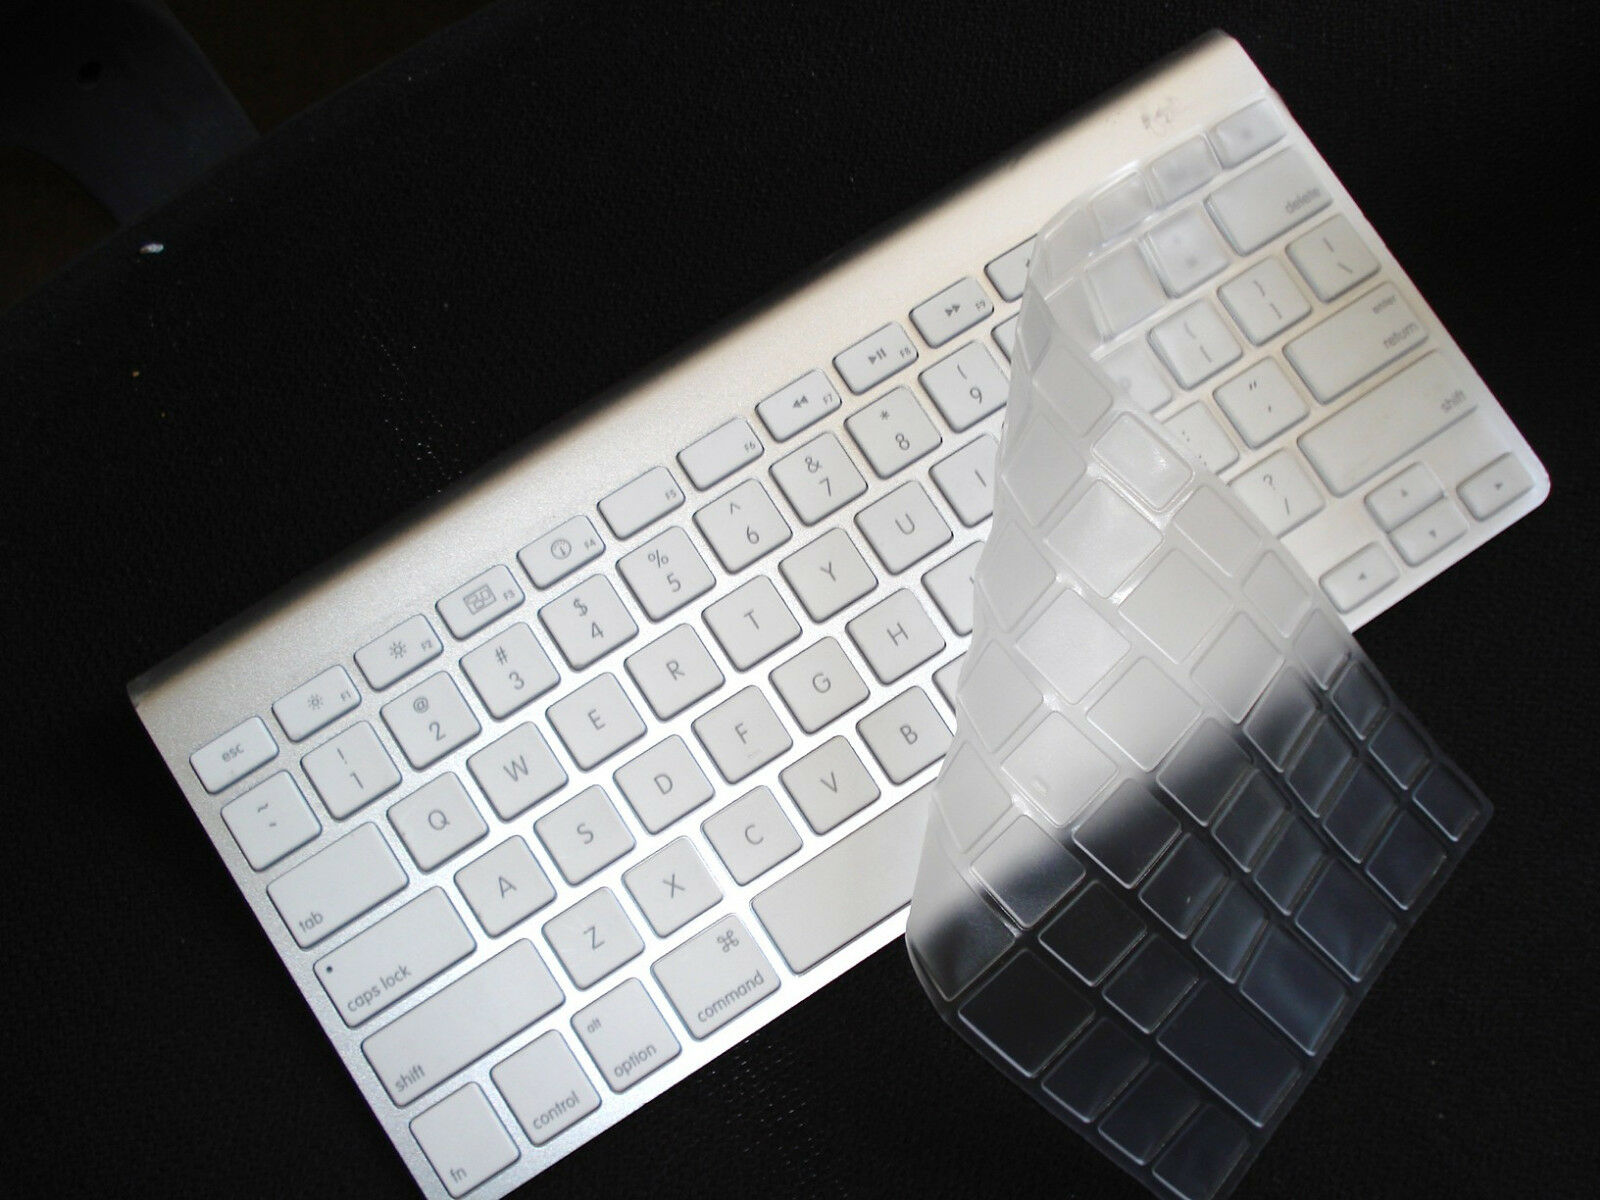 Lot Of 2 Clear Tpu Super Thin Cover Skin For Apple Wireless Keyboard A1255 A1314